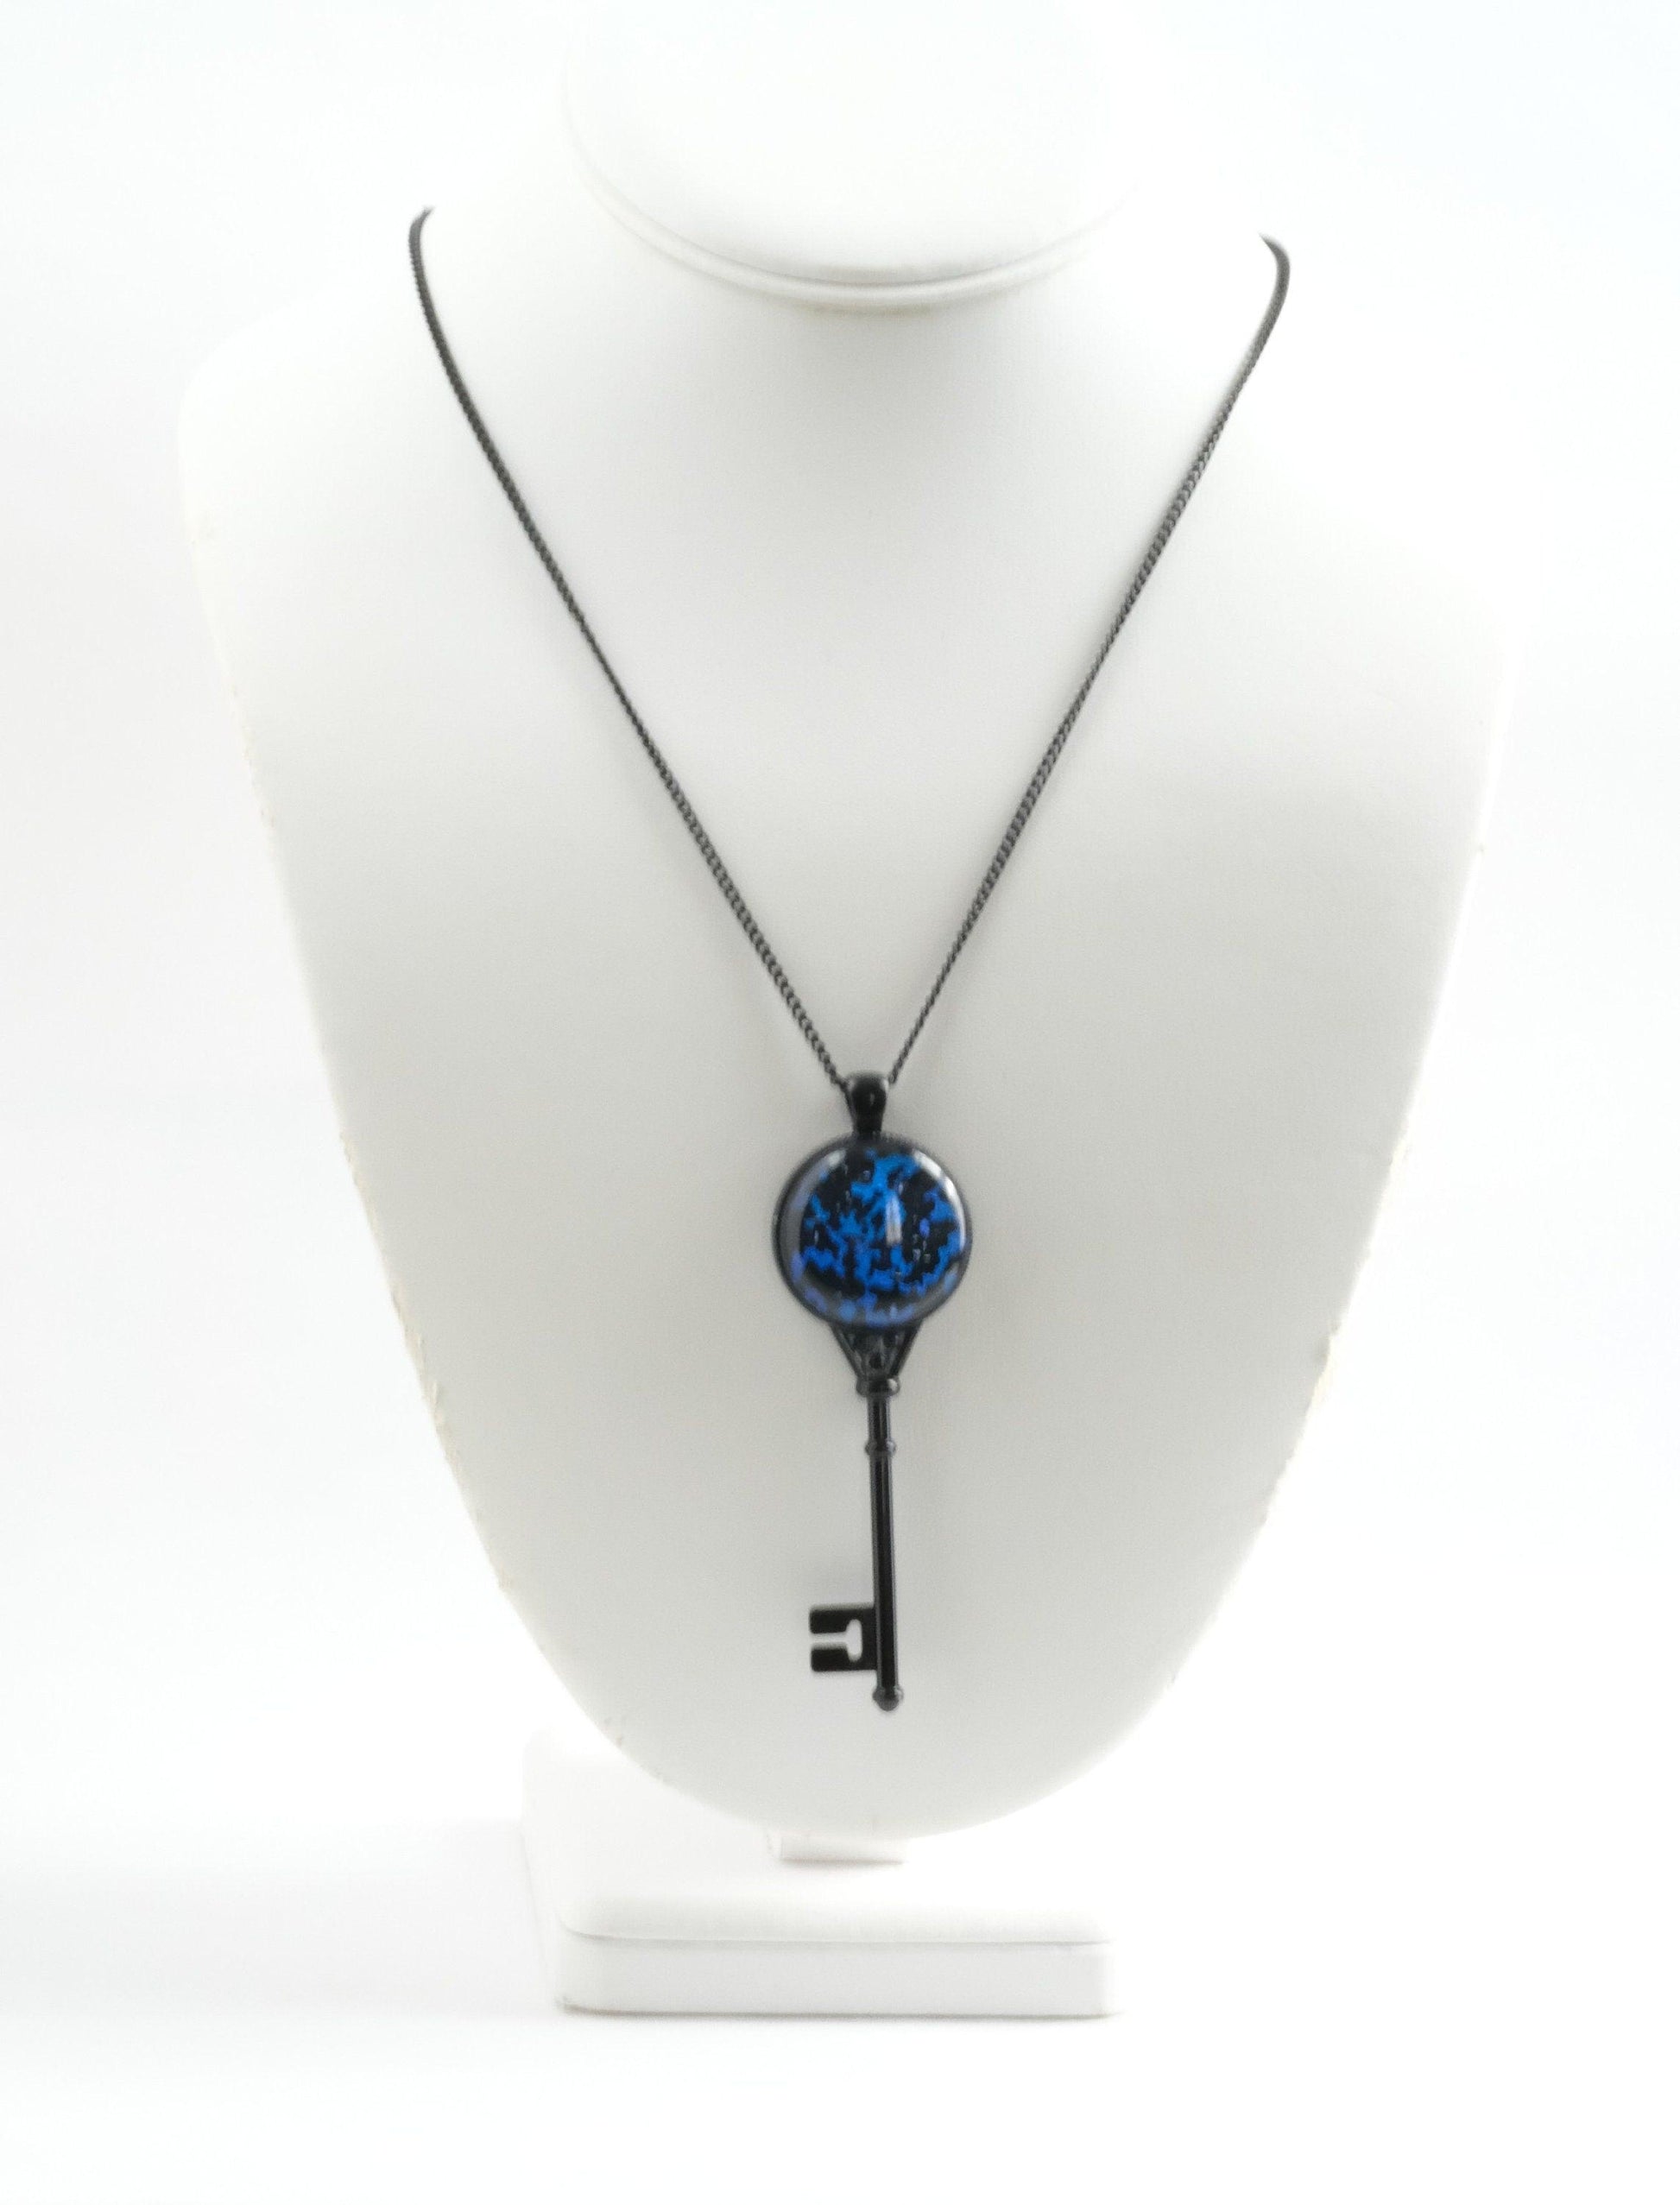 Black Metal Skeleton Key pendant necklace with Fused Glass Blue and Black  cabochon on 24 inch black chain jewelry seeds glassworks seedsglassworks